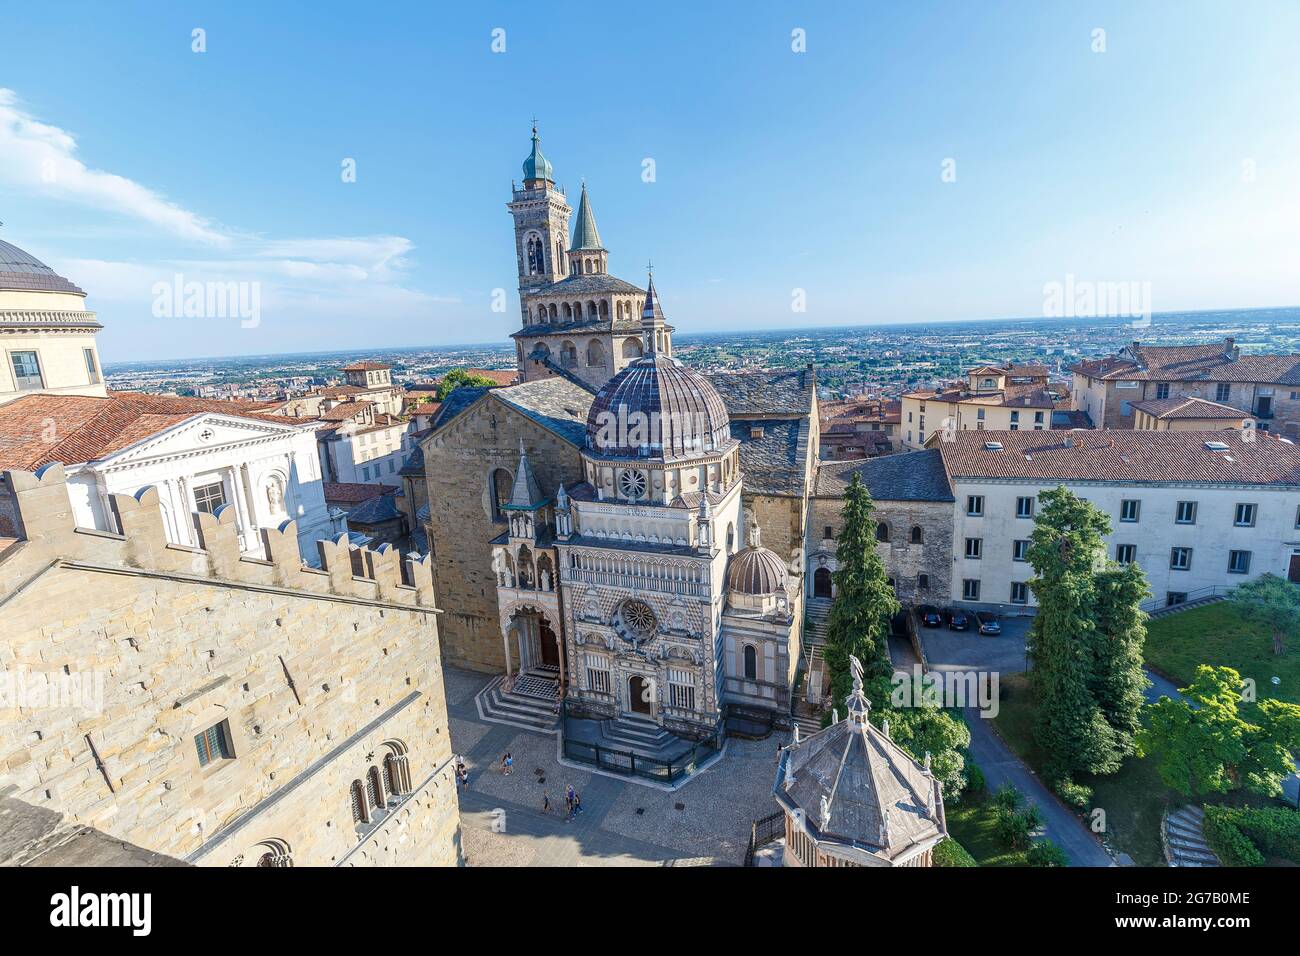 Bergamo, Italy - July 10, 2021: street view of Bergamo Alta citadel in full daylight, people are visible in the distance. Stock Photo